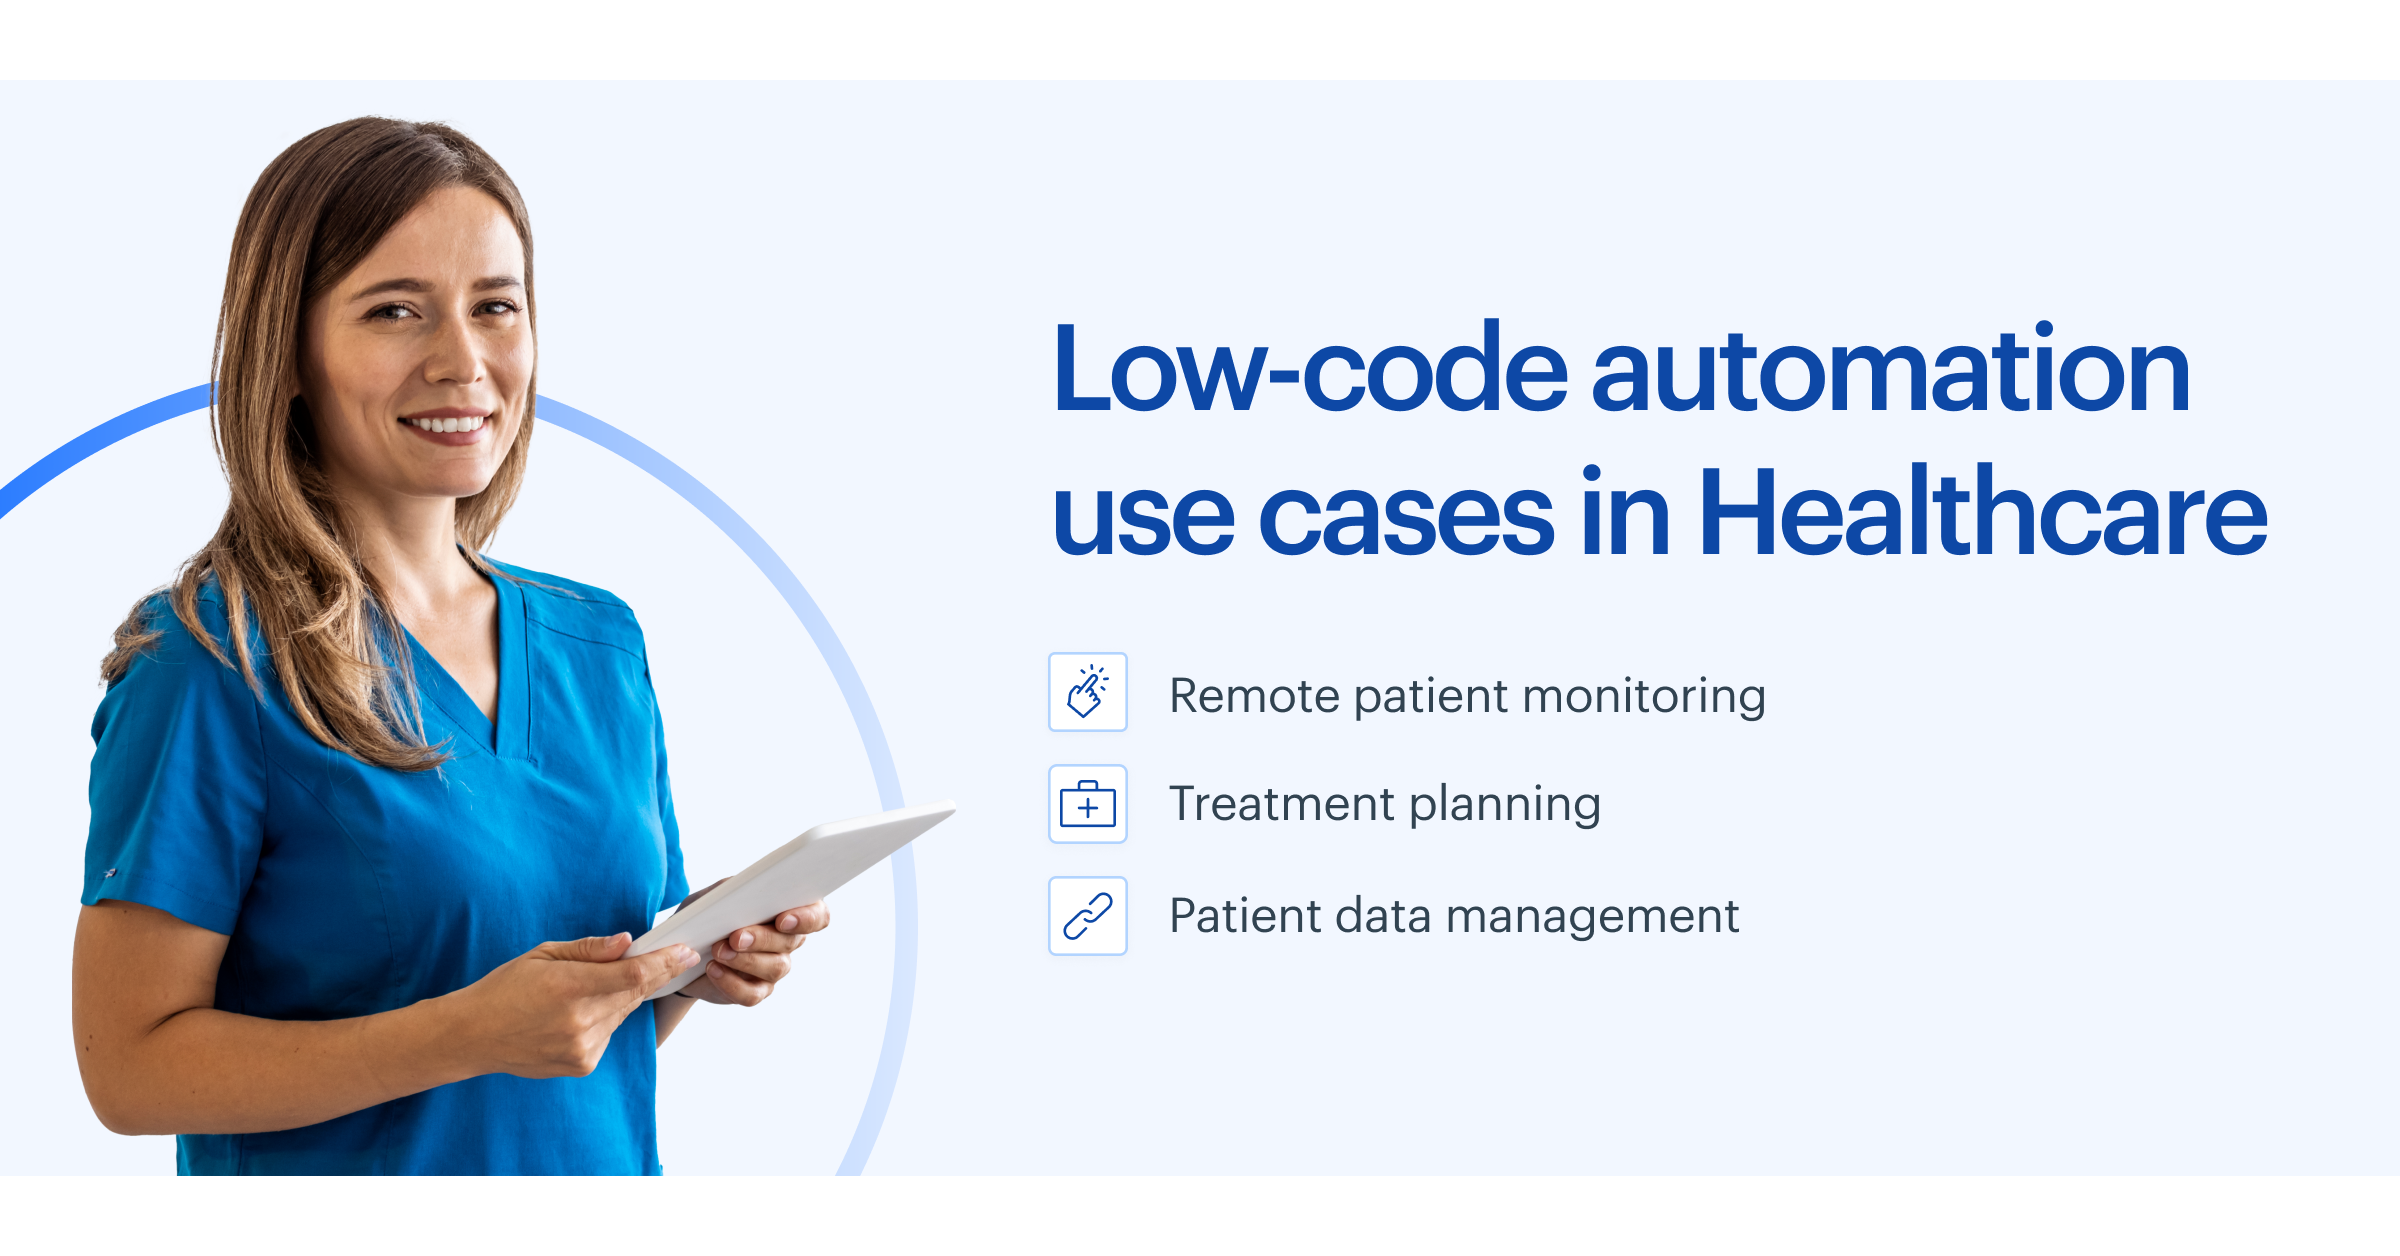 Low code automation use cases in Healthcare